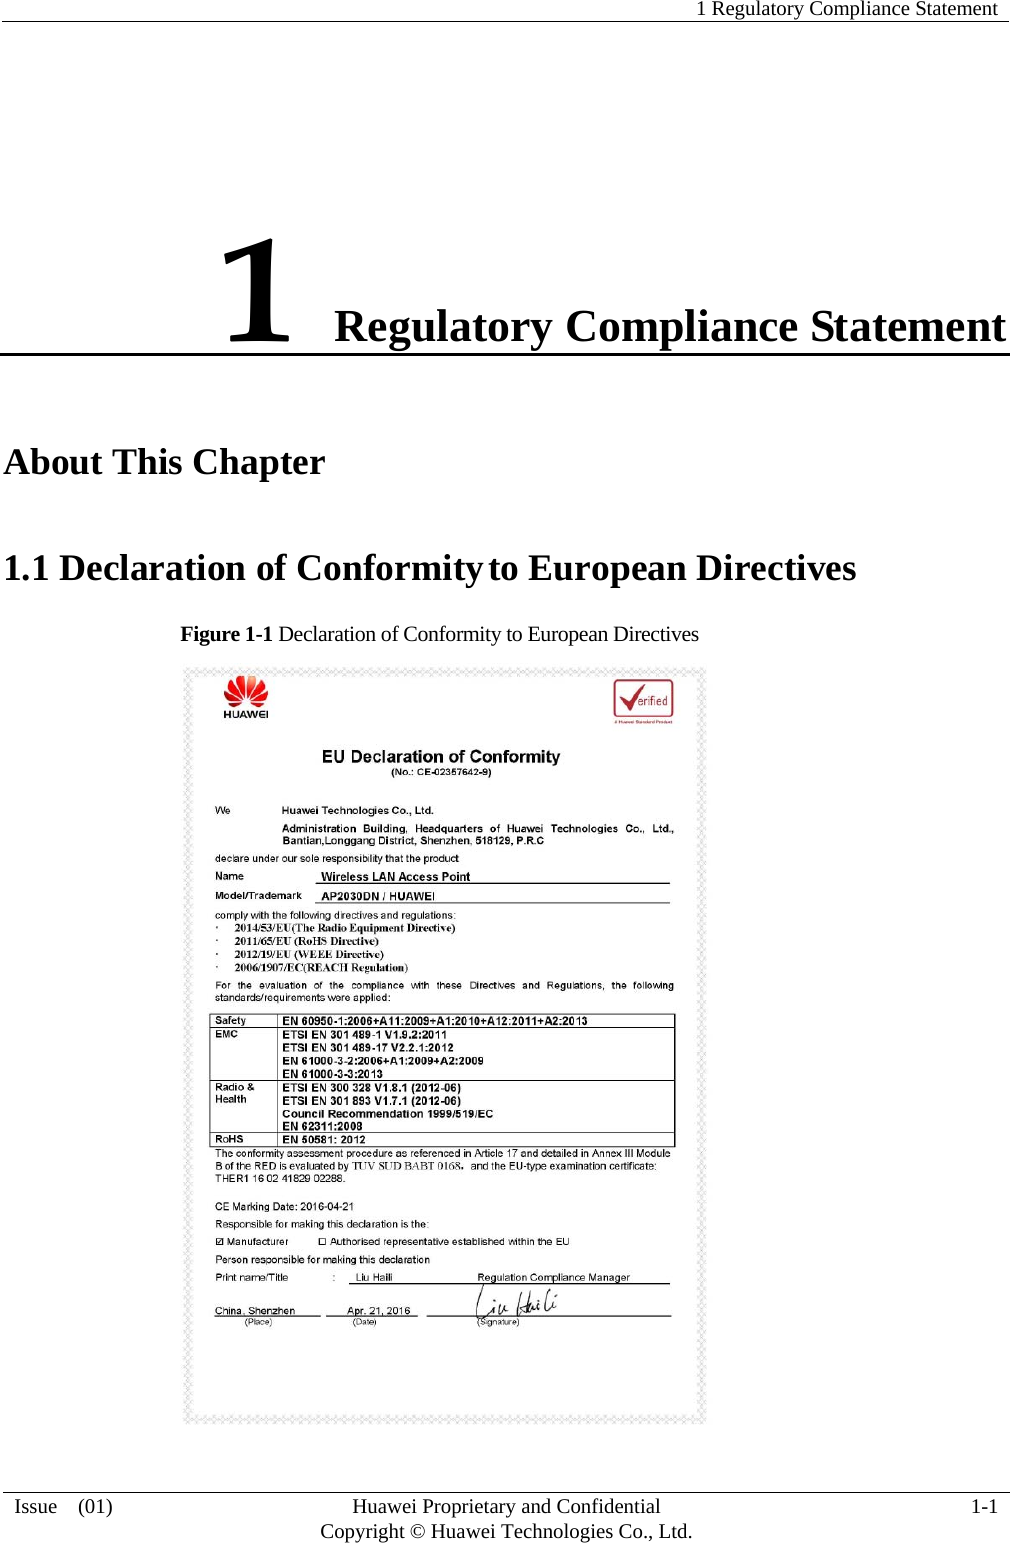   1 Regulatory Compliance Statement  Issue  (01)  Huawei Proprietary and Confidential     Copyright © Huawei Technologies Co., Ltd. 1-1 1 Regulatory Compliance Statement About This Chapter 1.1 Declaration of Conformity to European Directives Figure 1-1 Declaration of Conformity to European Directives    